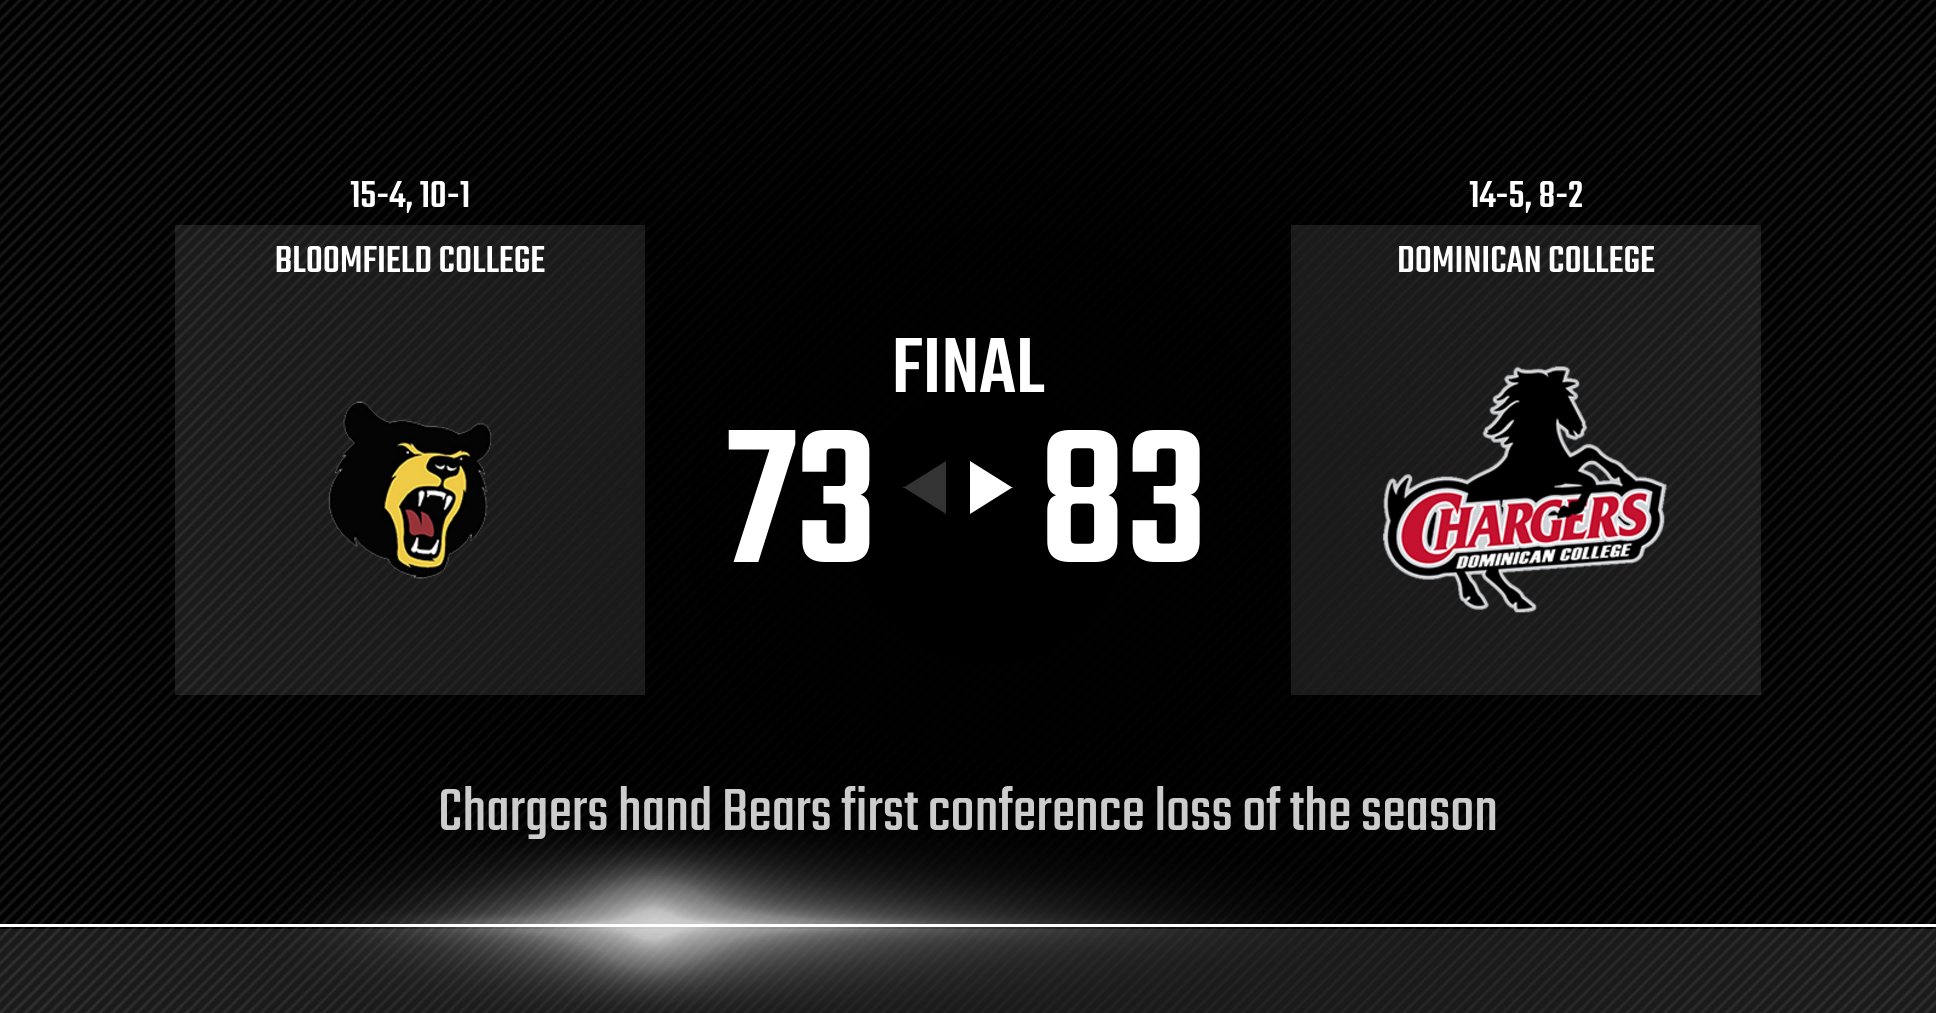 CHARGERS HAND BEARS FIRST CONFERENCE LOSS OF THE SEASON